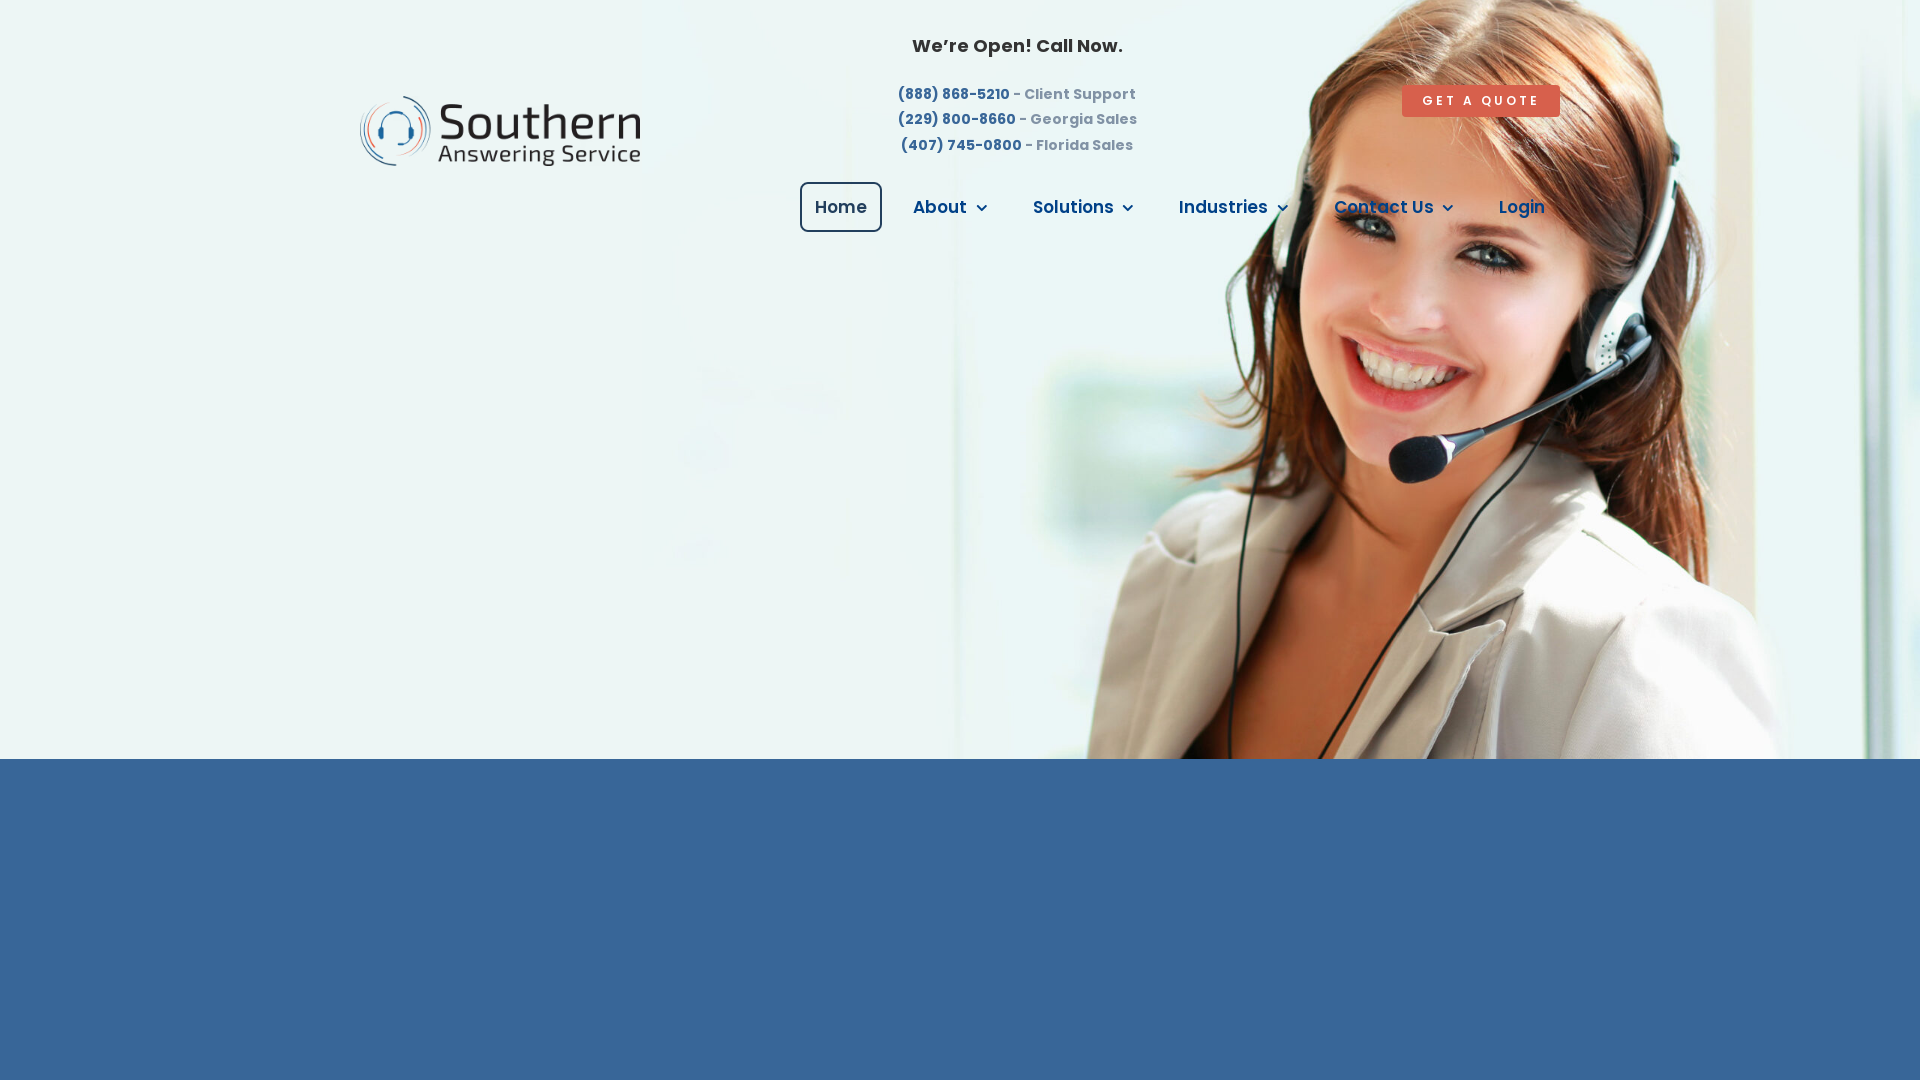 Southern Answering Service